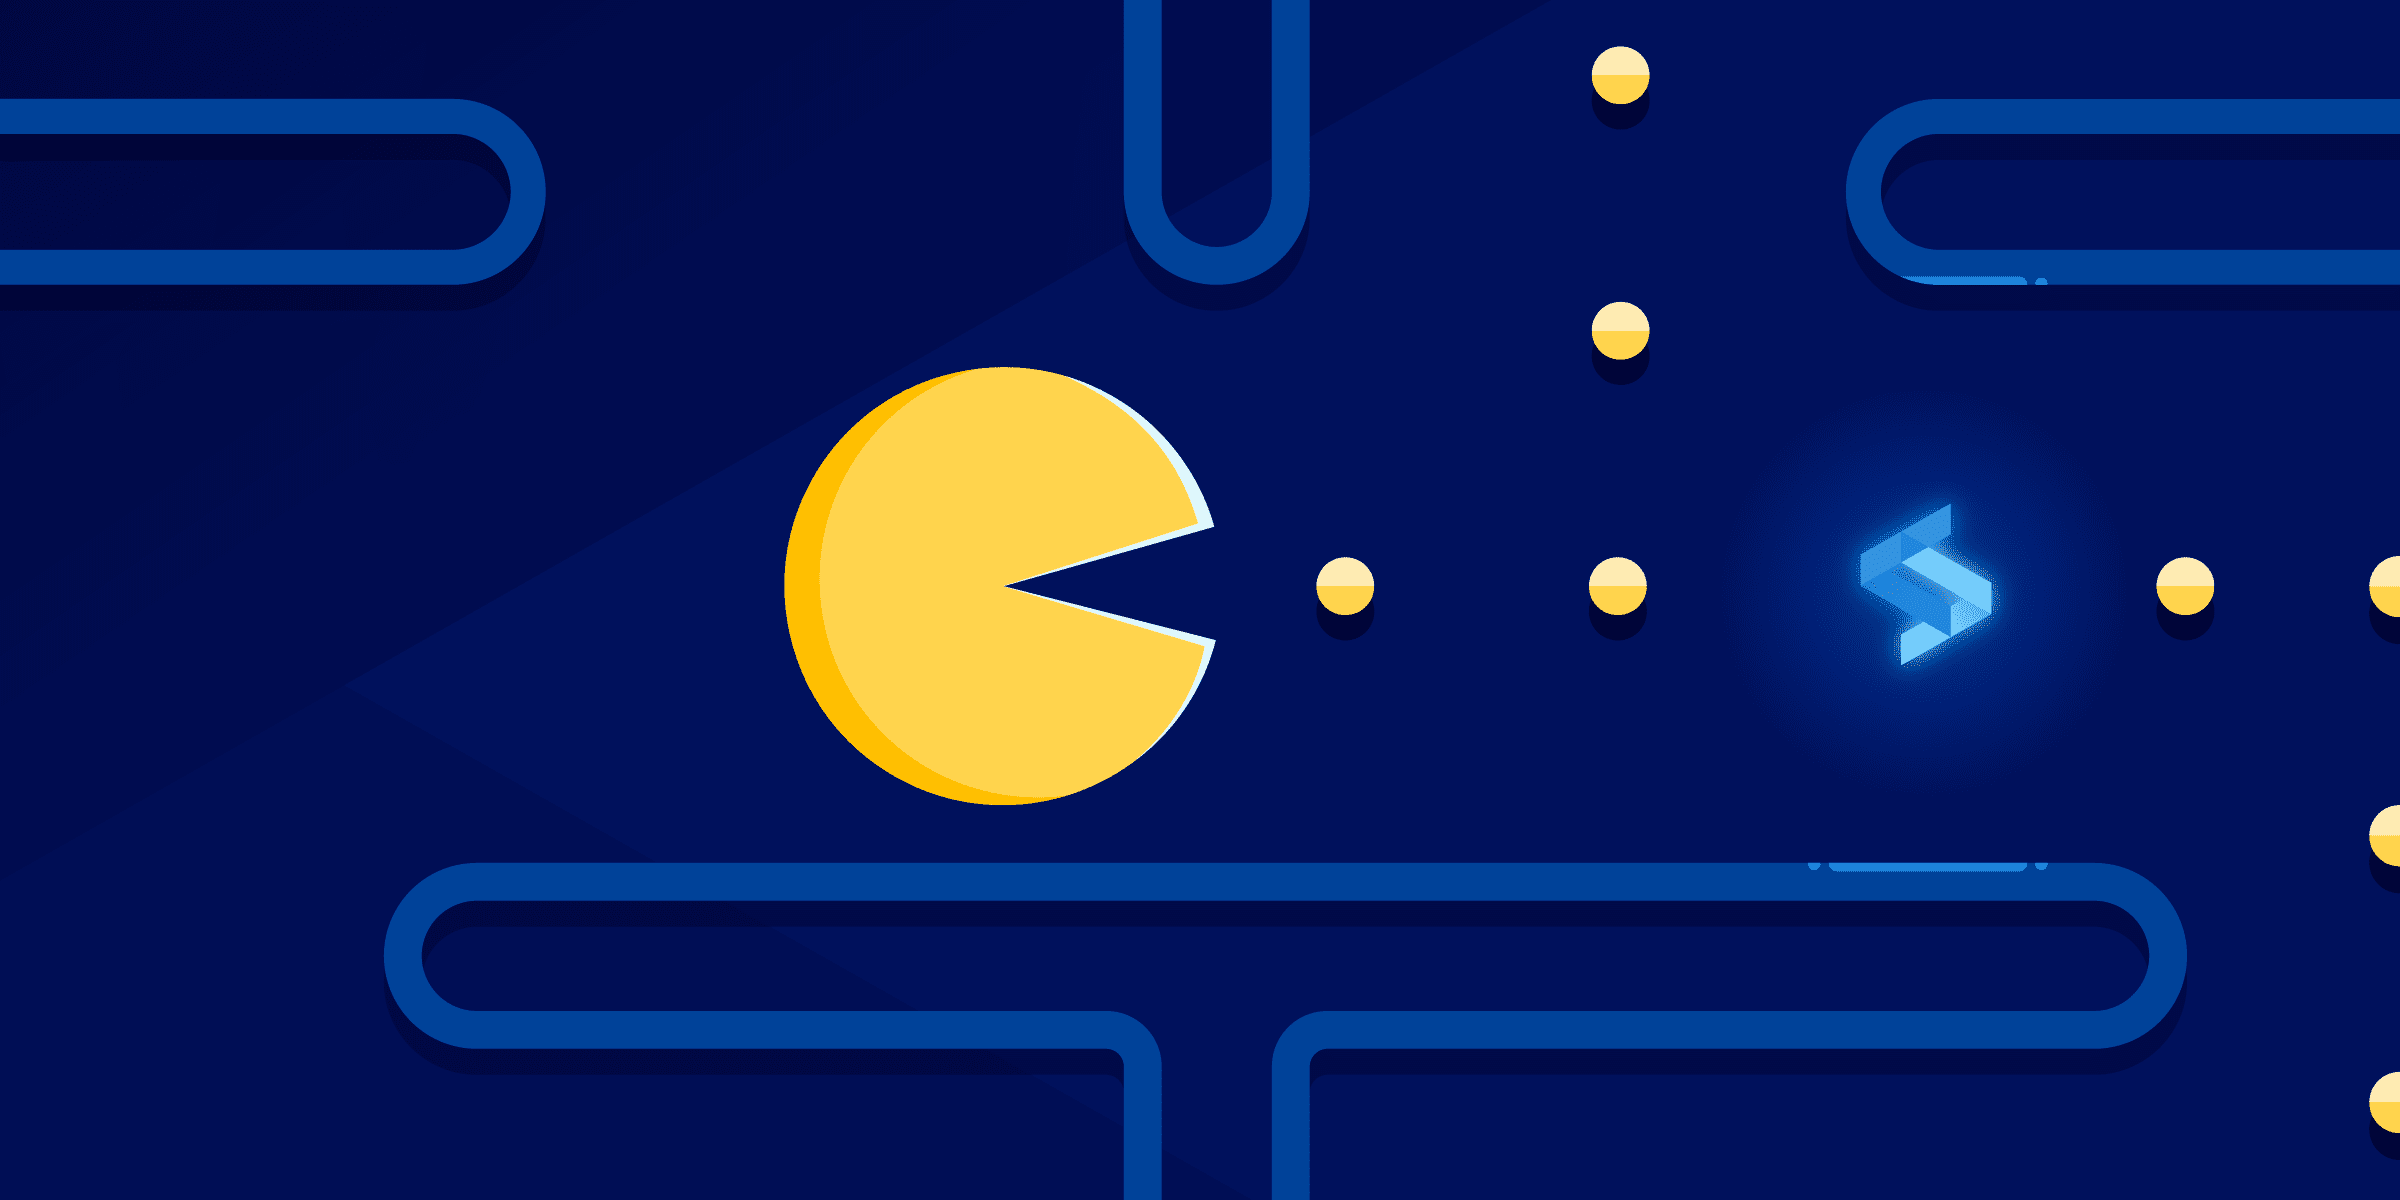 PacMan  Animated wallpaper by Jimking on DeviantArt